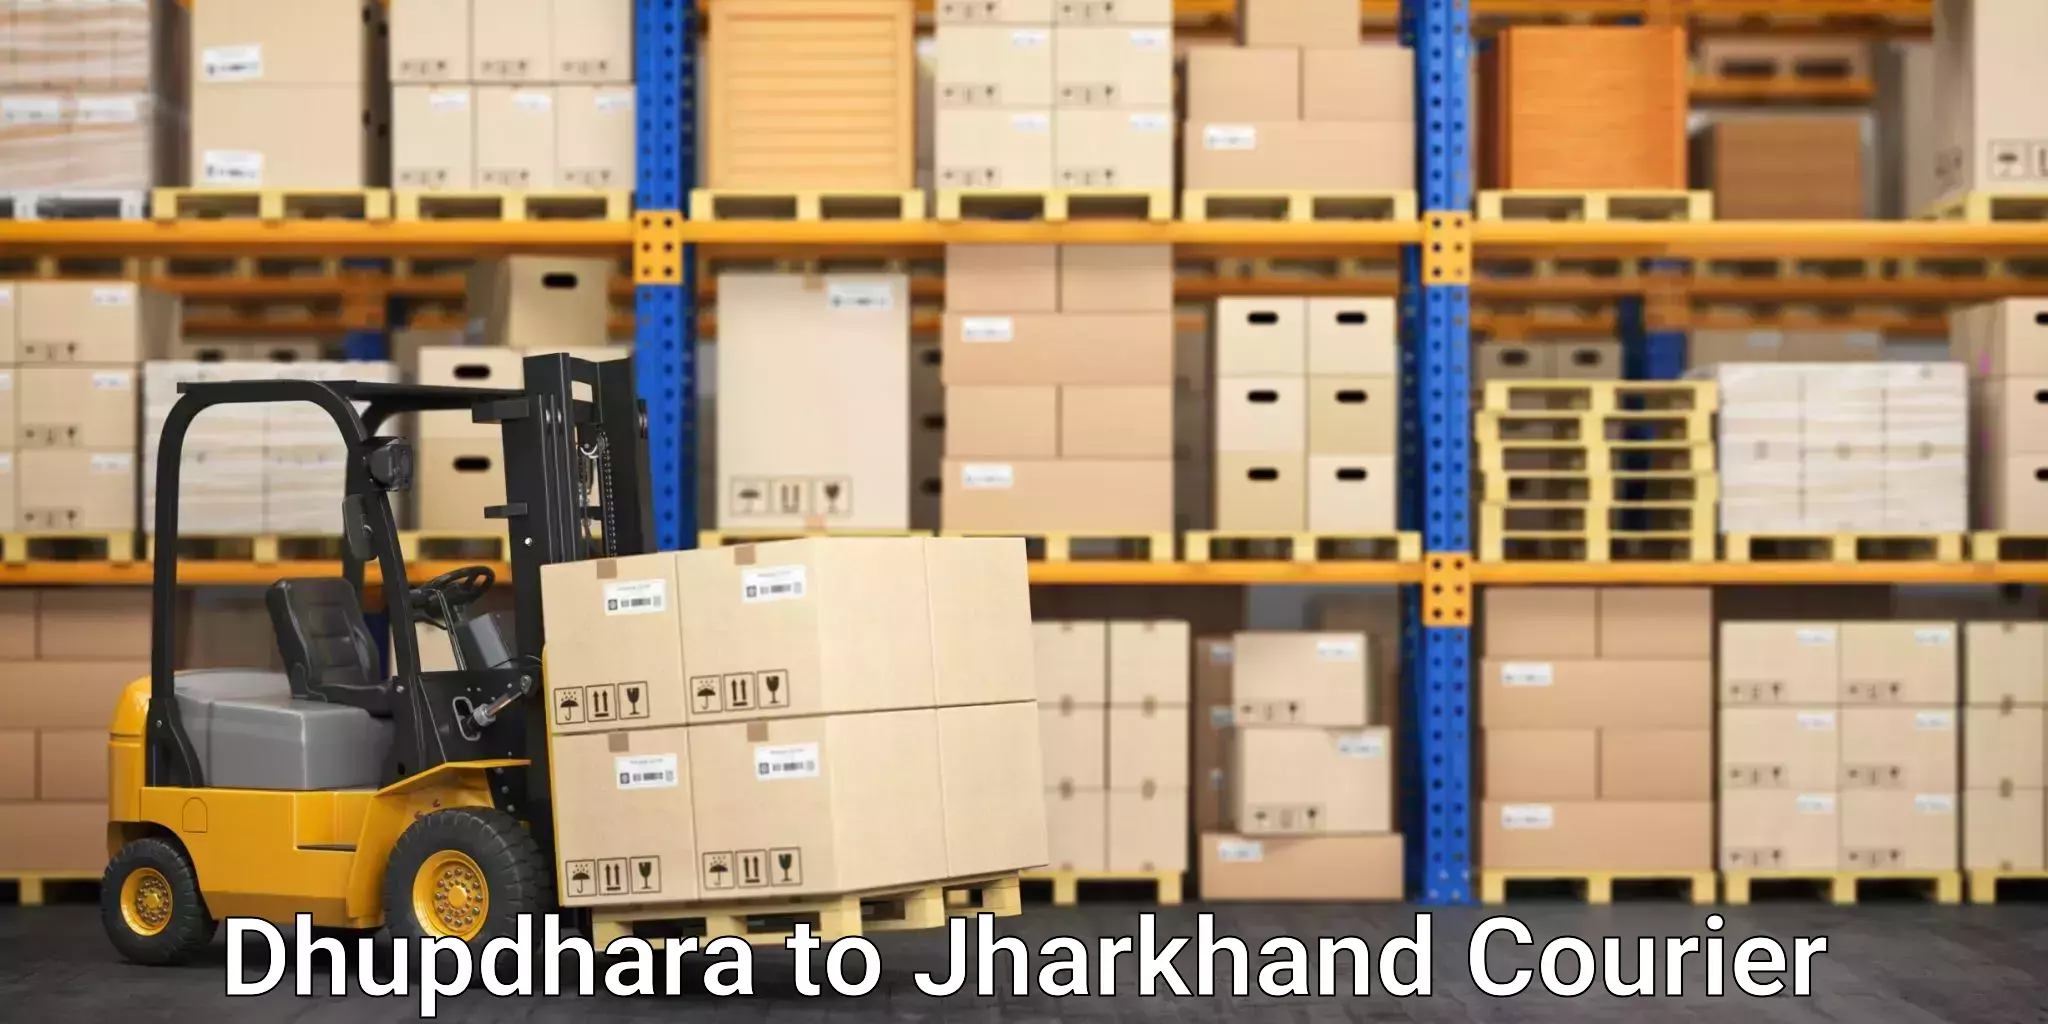 Efficient courier operations Dhupdhara to Godabar Chatra